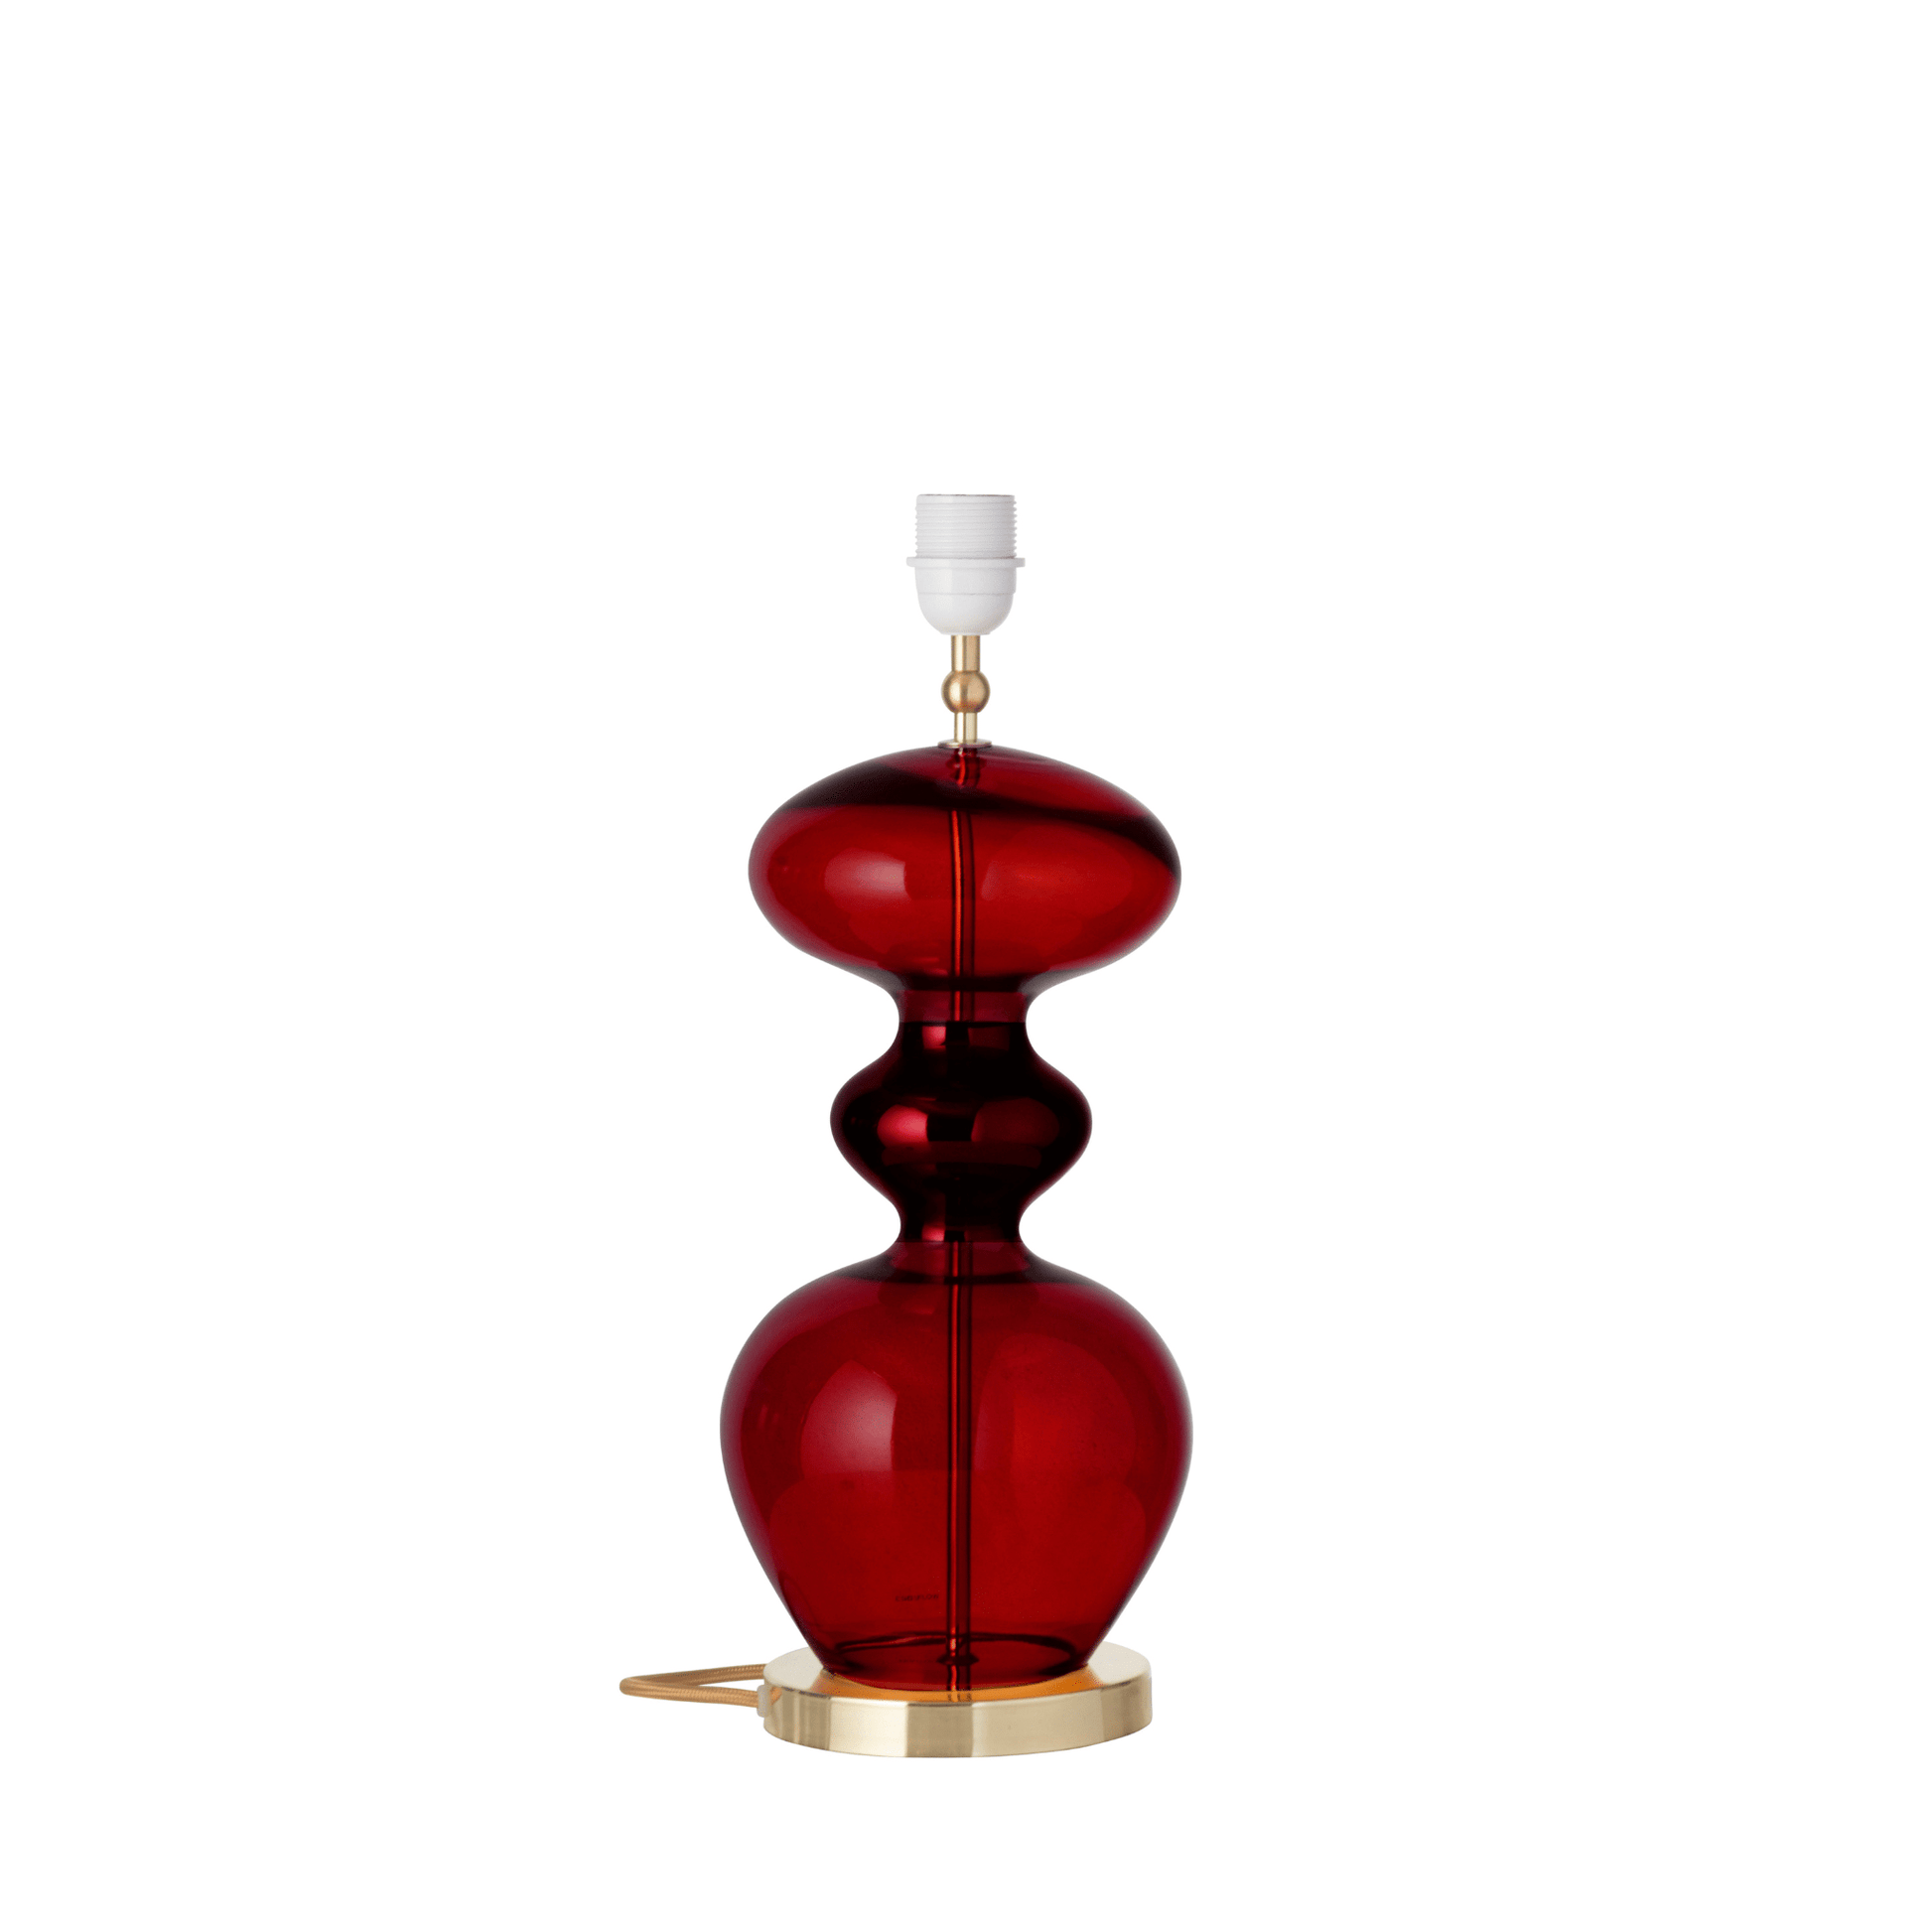 Ebb&Flow Table Lamp Ruby Futura Extra Large Table/Floor Lamp Base